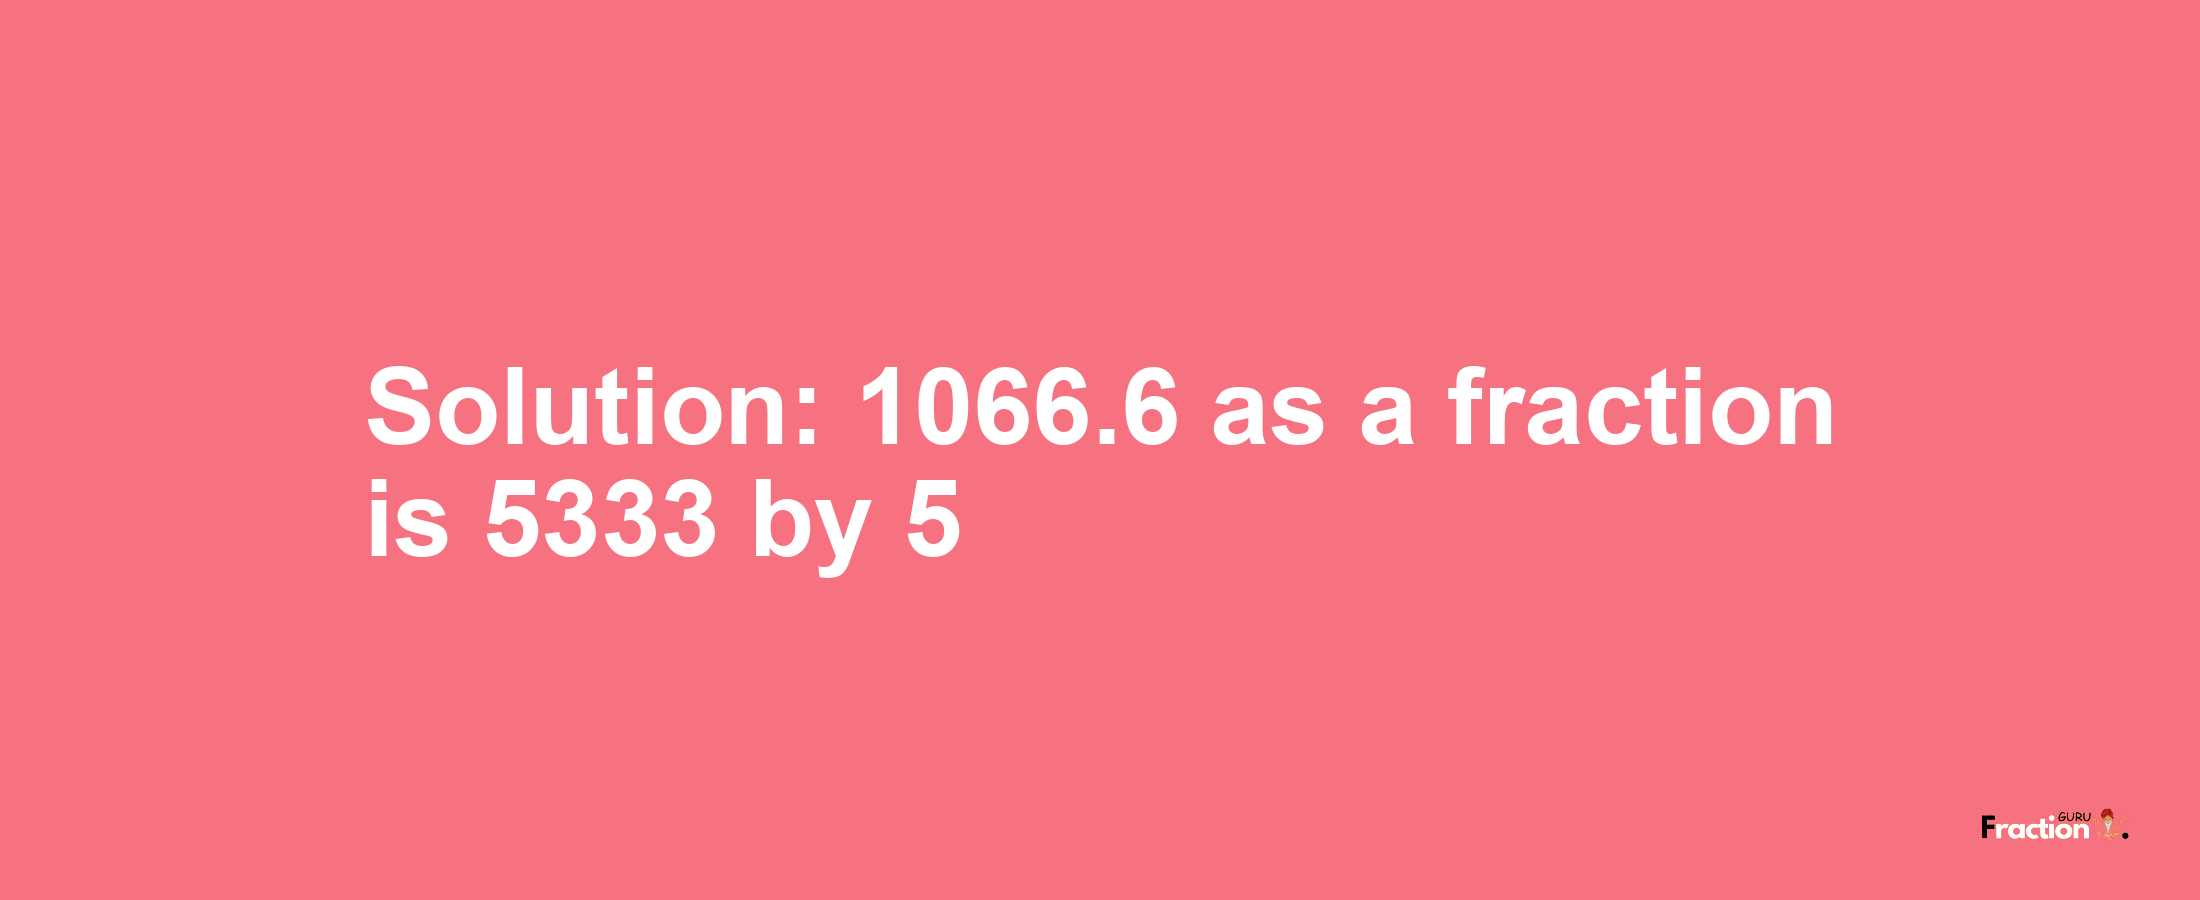 Solution:1066.6 as a fraction is 5333/5